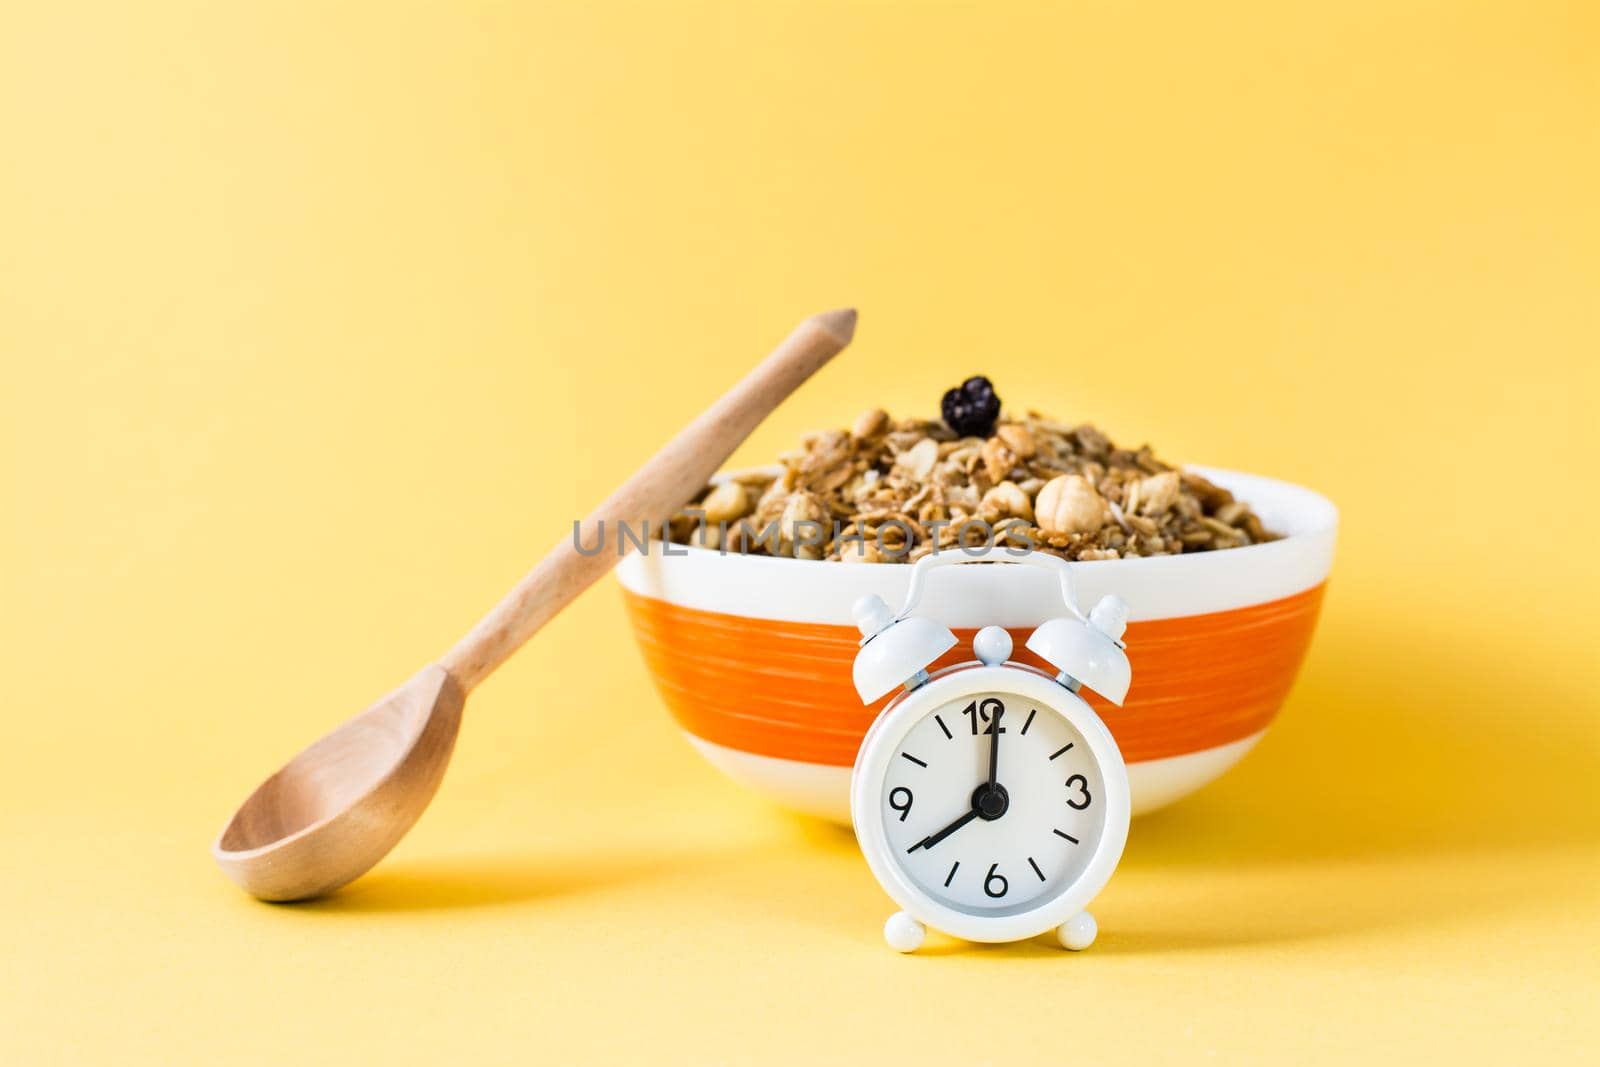 Healthy eating. Alarm clock in front of a baked granola made from oats, nuts and raisins in a bowl and a wooden spoon on a yellow background by Aleruana